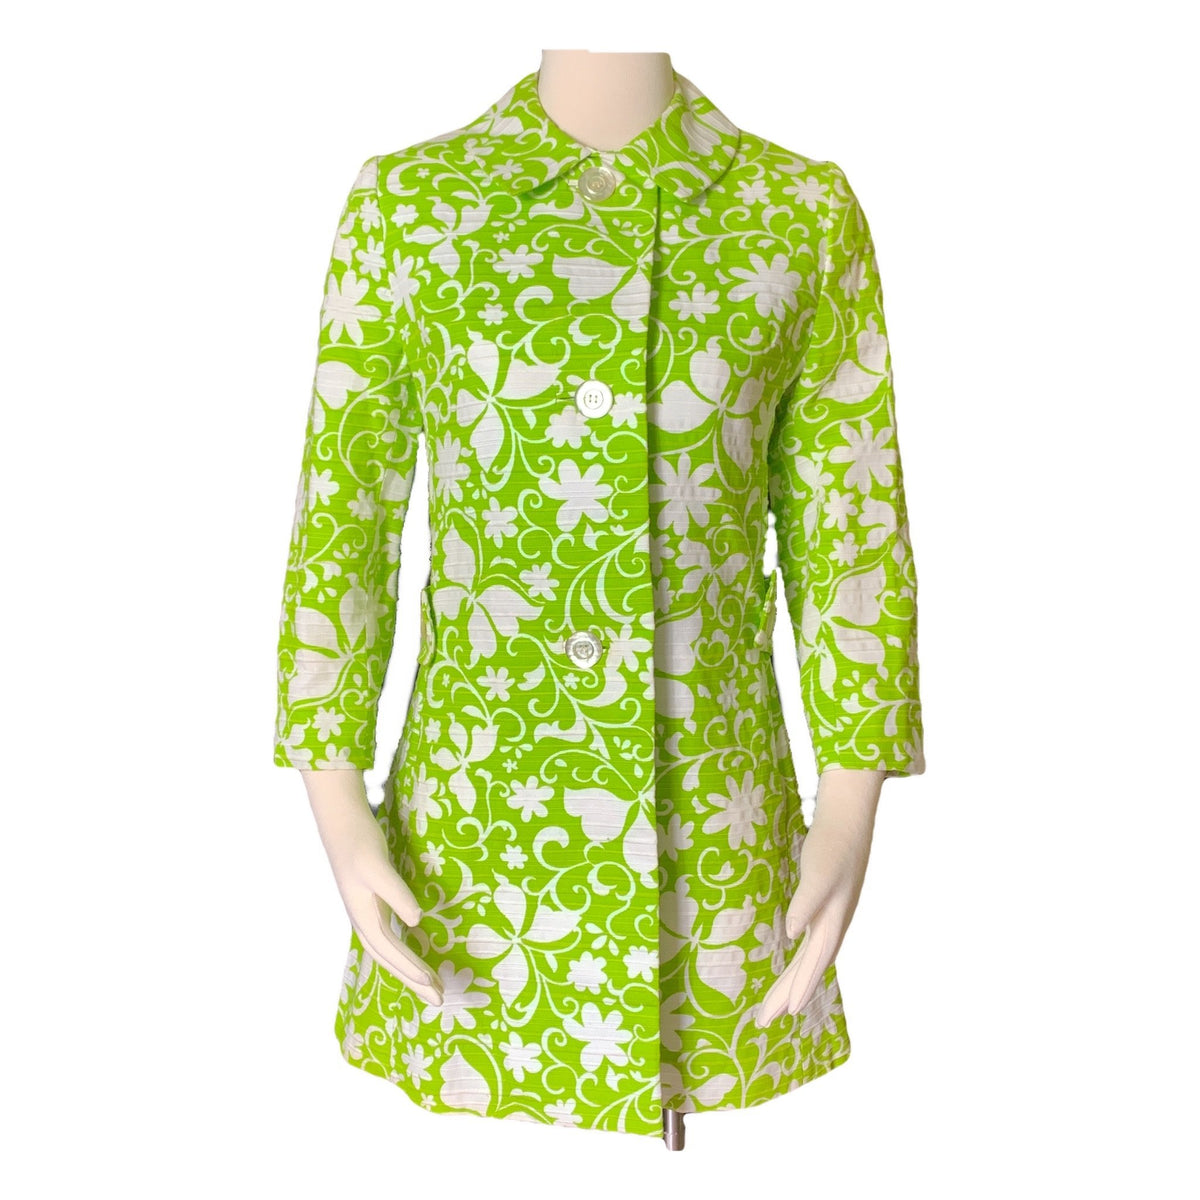 Vintage Green and White Spring Coat from Saks Fifth Avenue. Butterfly